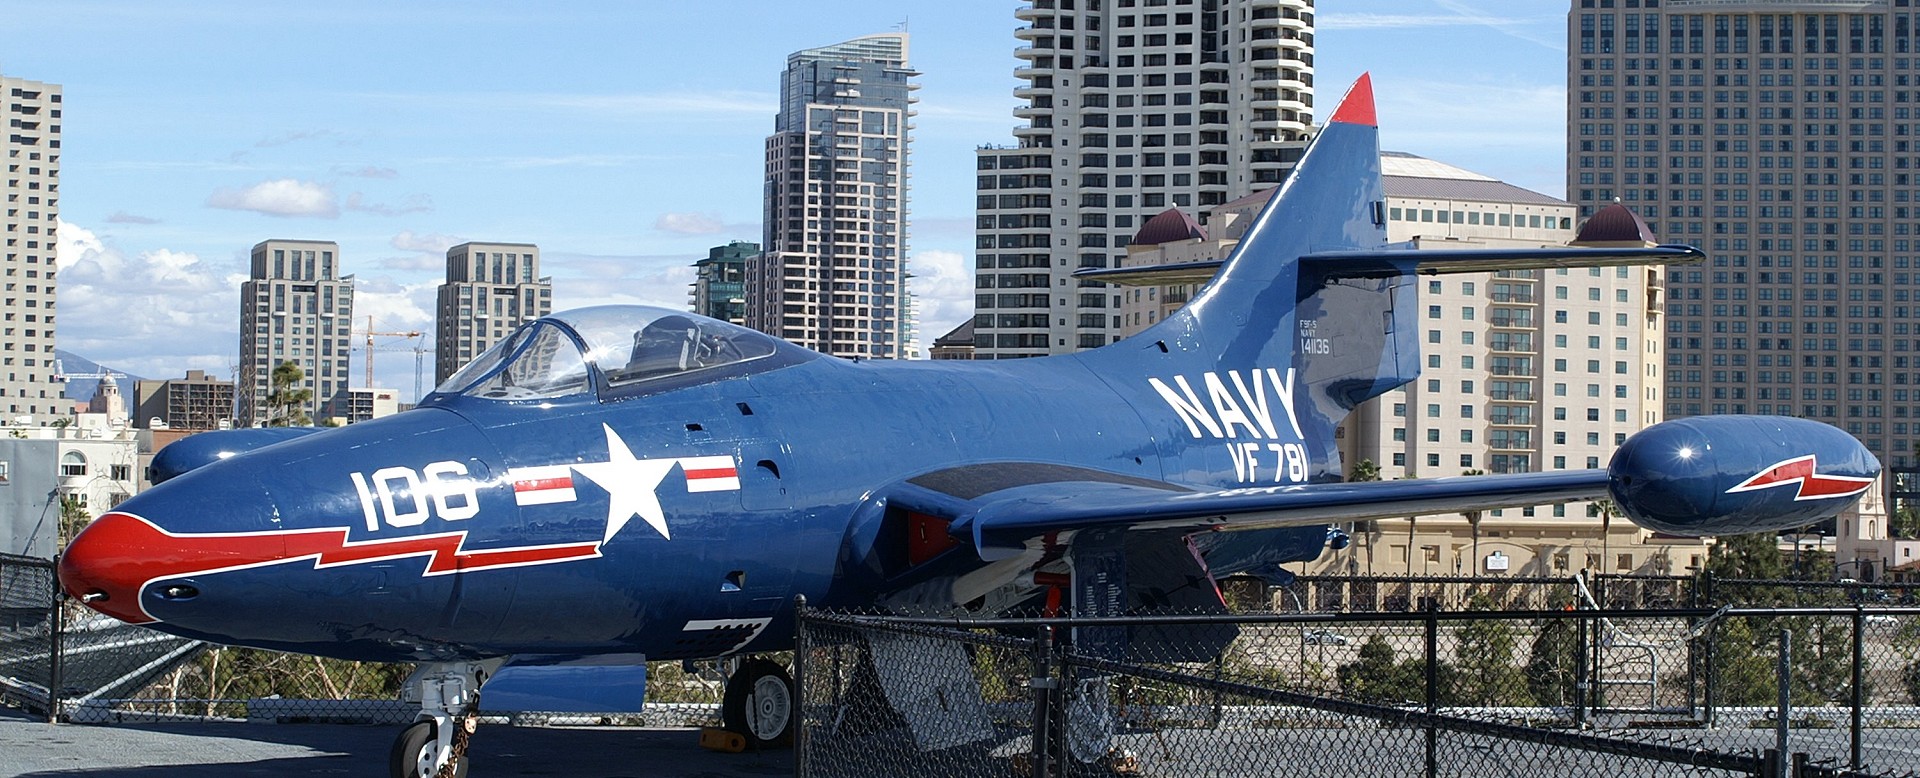 USS Midway Museum - Navy fighter on flight deck with San Diego in the background